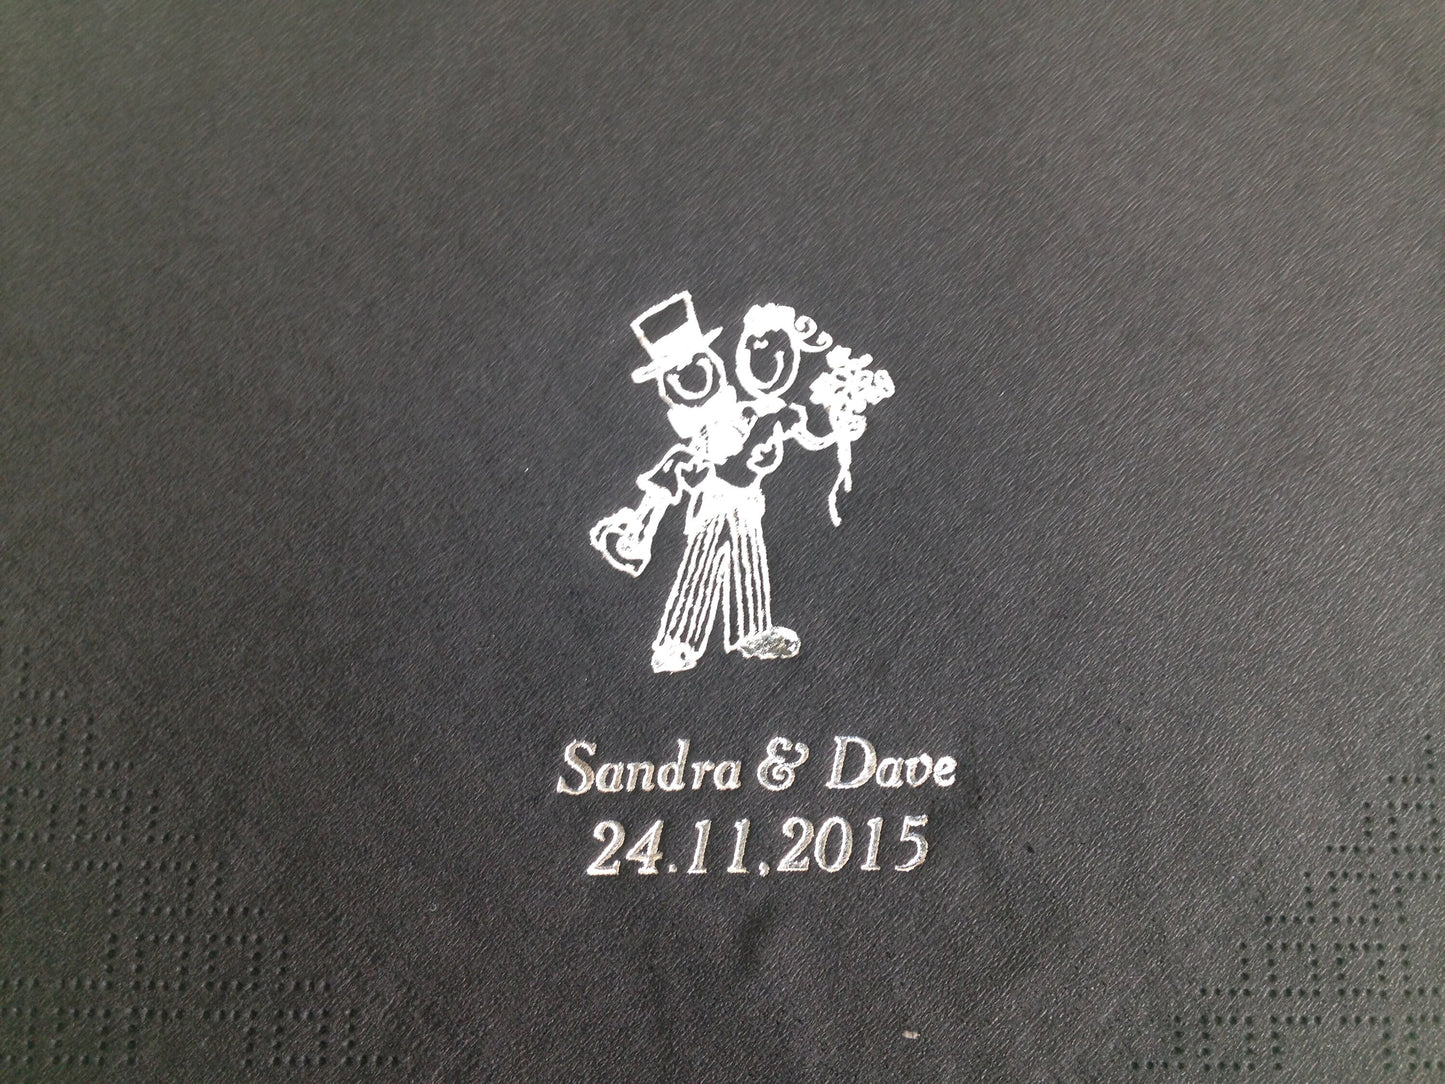 100 Personalised Napkins / Serviettes Quality 3ply Dinner, Wedding, Birthday, Anniversary, Party, Christening